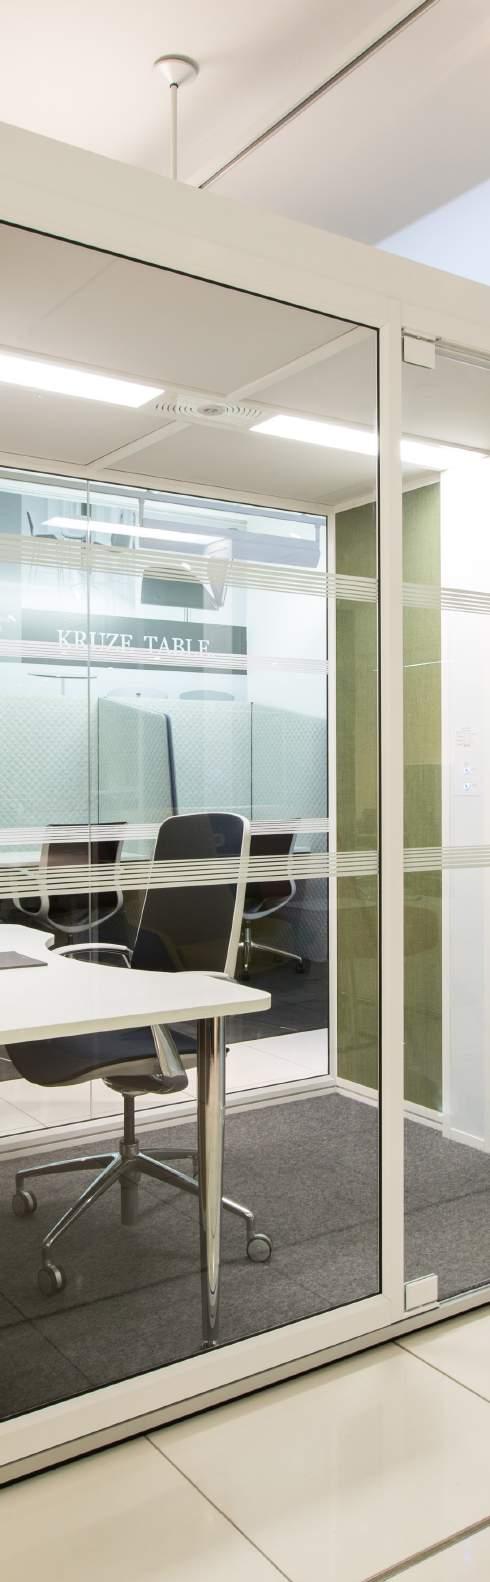 2275 Why Boss Pods? The workplace is changing. Offices and commercial spaces are beginning to take on a fresh approach to the generic work environment.